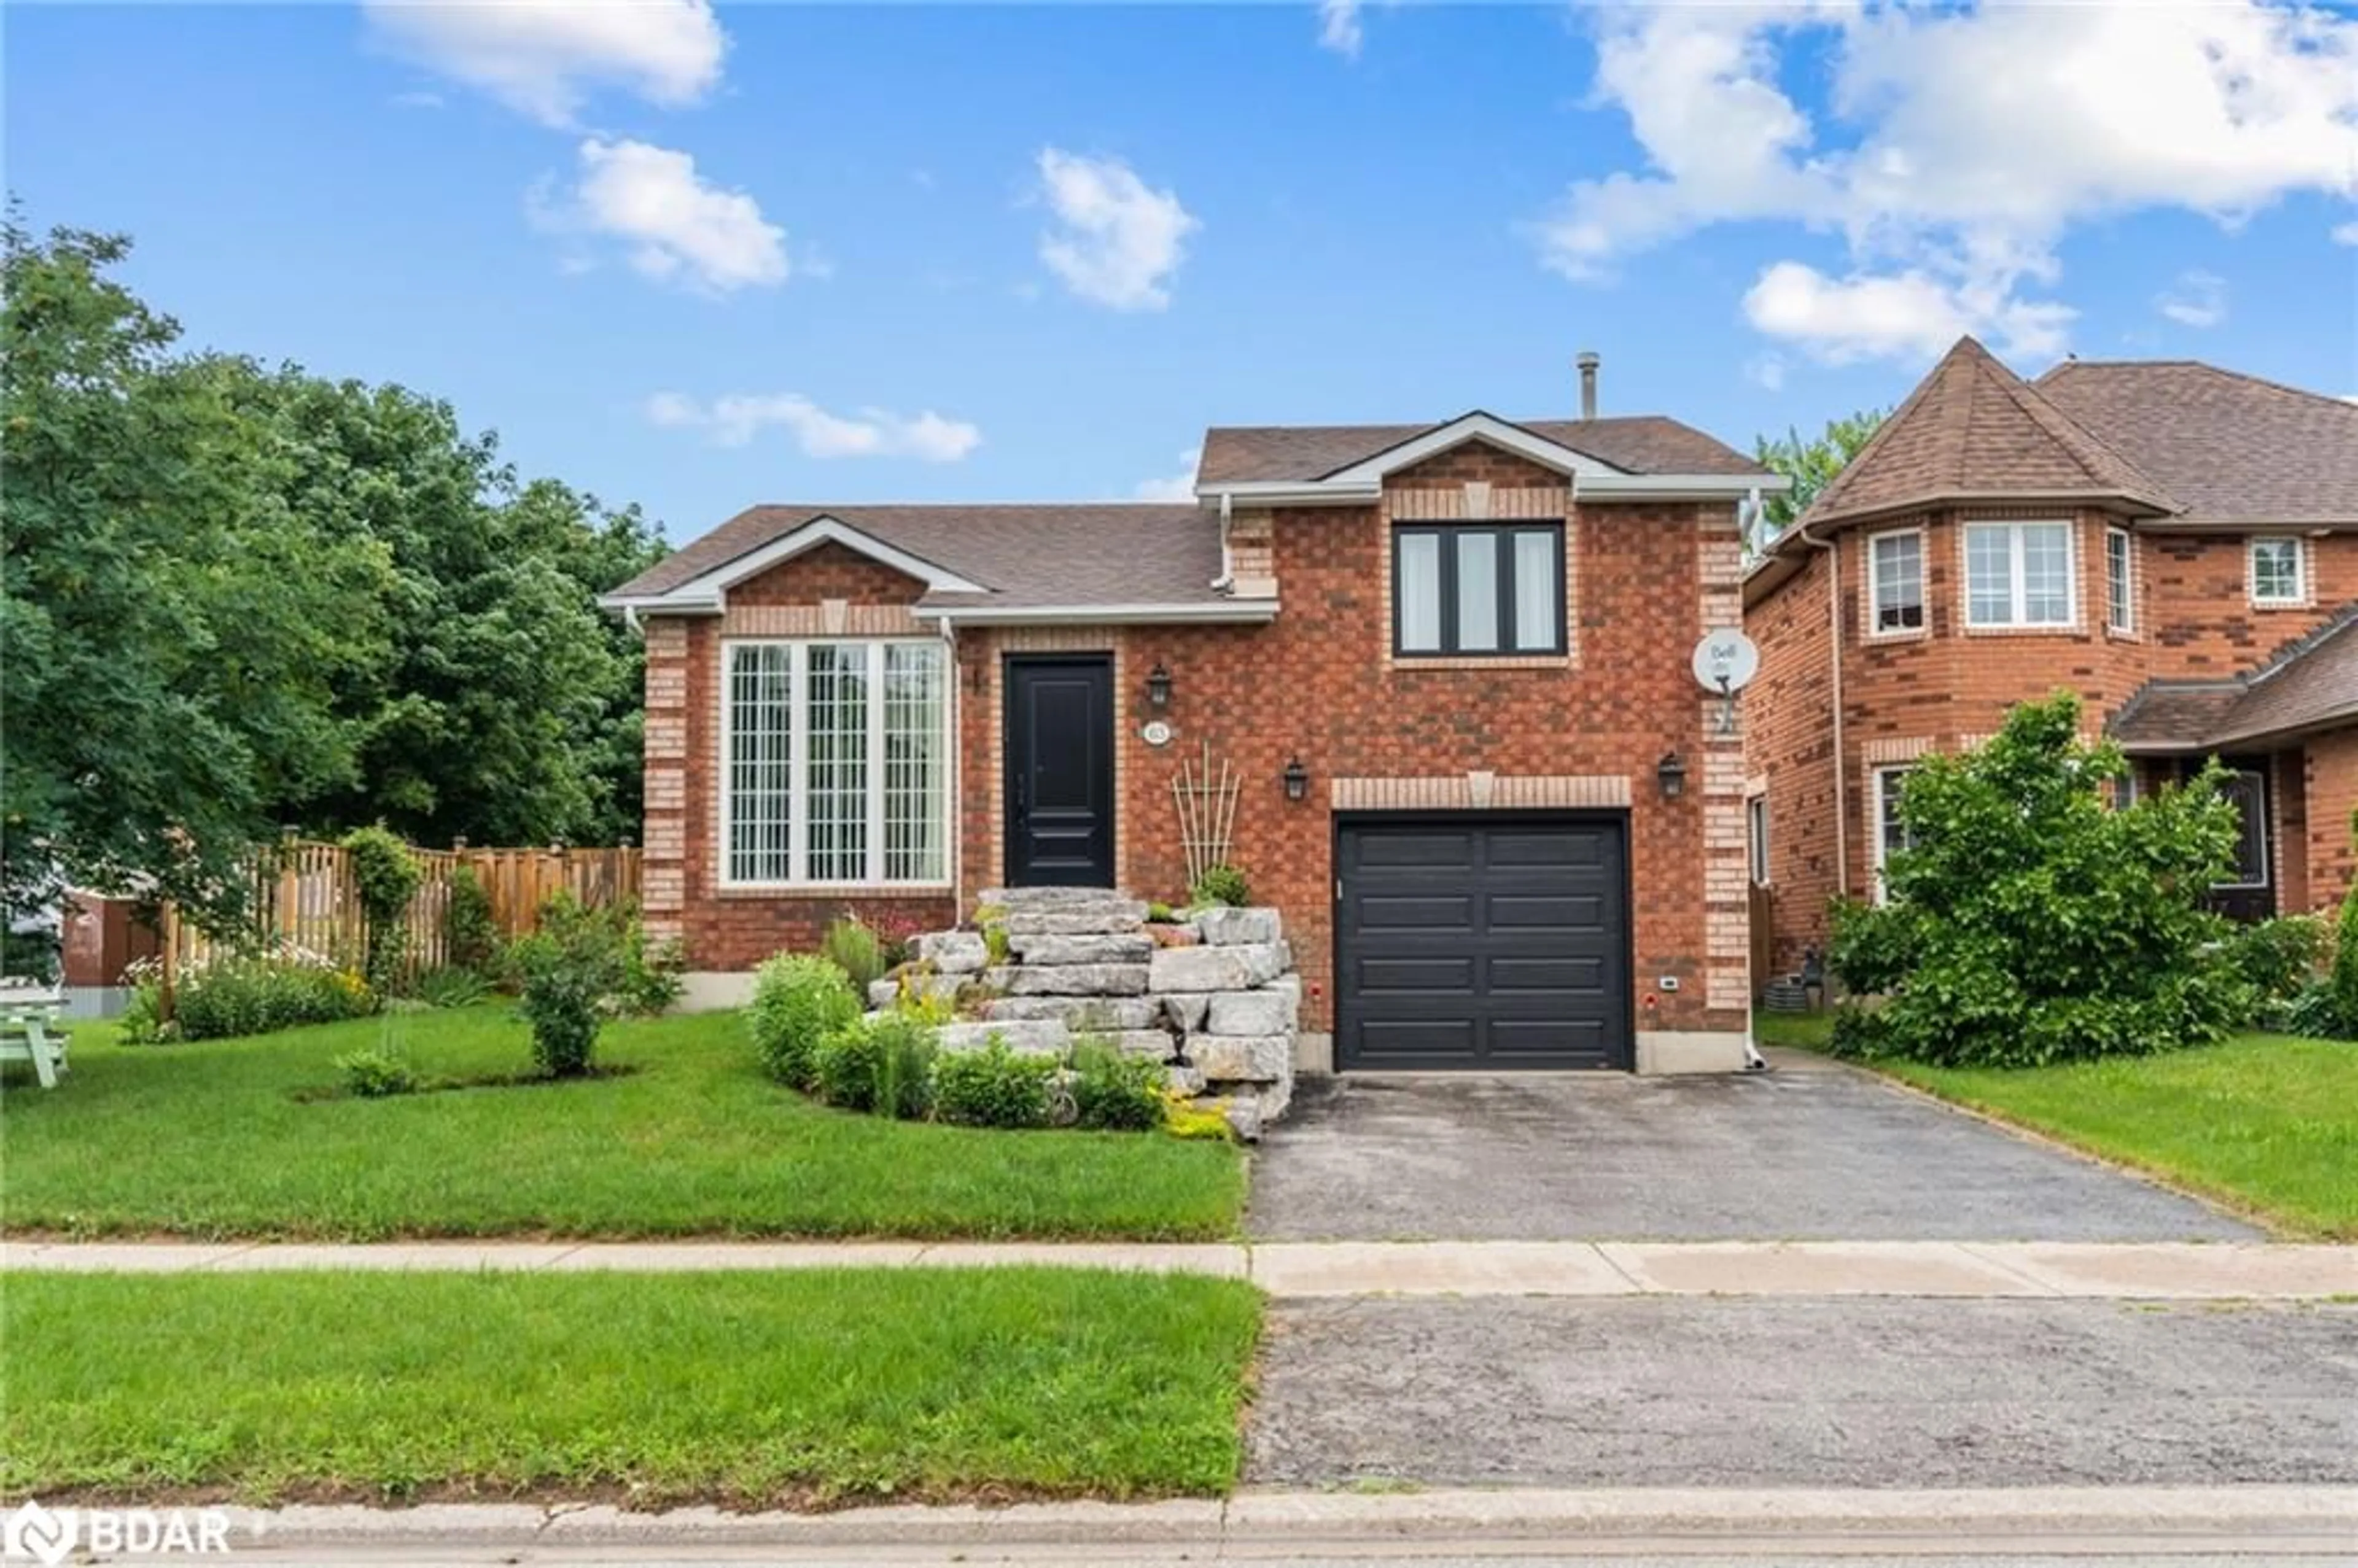 Home with brick exterior material for 63 Hersey Cres, Barrie Ontario L4N 8R2